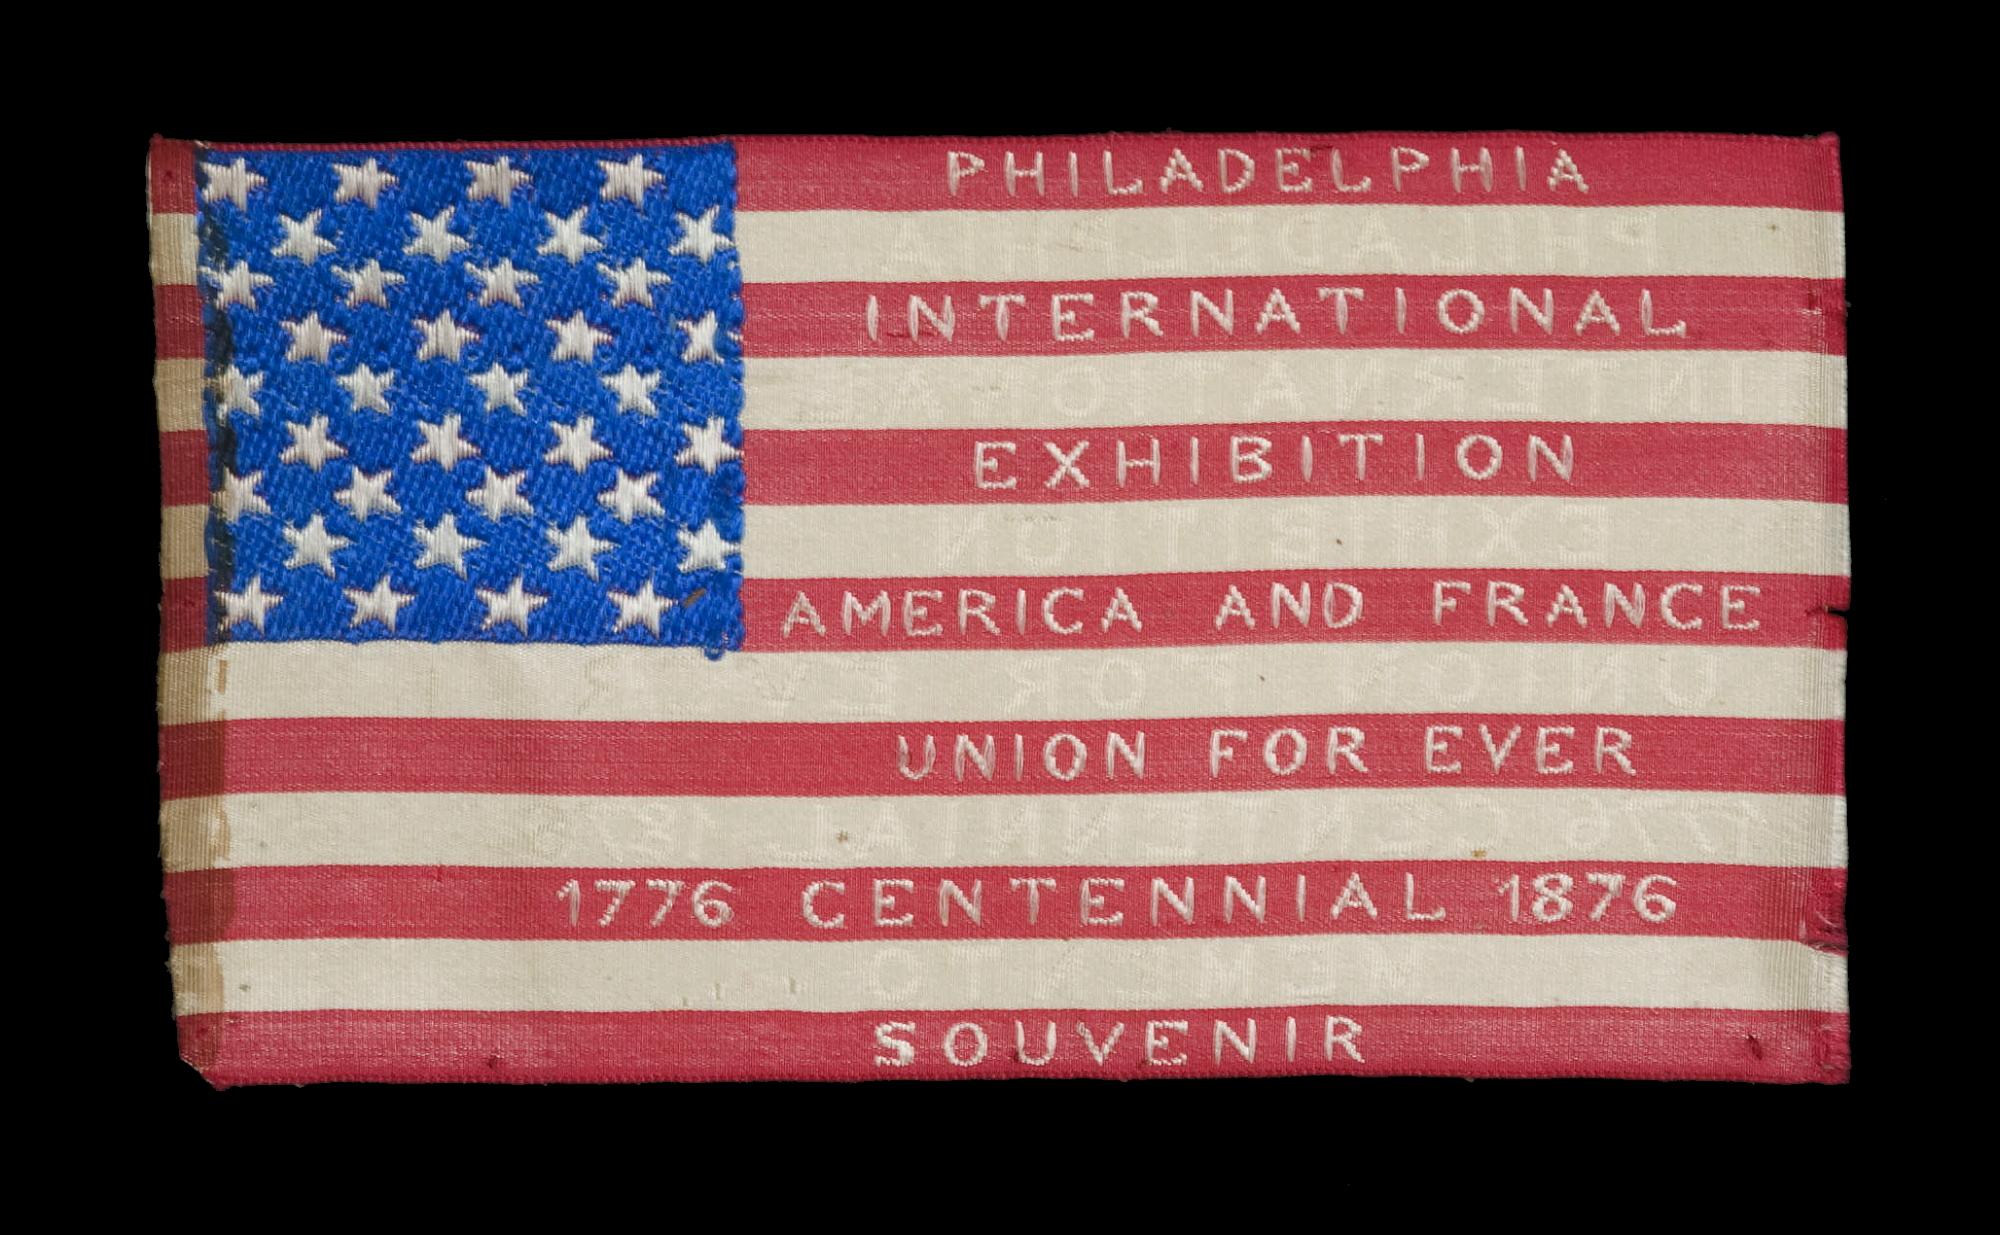 FRENCH-DESIGNED AMERICAN FLAG, WOVEN SILK WITH TEXT ON BOTH SIDES, PRODUCED FOR THE 100TH ANNIVERSARY OF AMERICAN INDEPENDENCE; LIKELY MADE IN PHILADELPHIA AT THE 1876 CENTENNIAL INTERNATIONAL EXPOSITION

American national flag, made of silk,